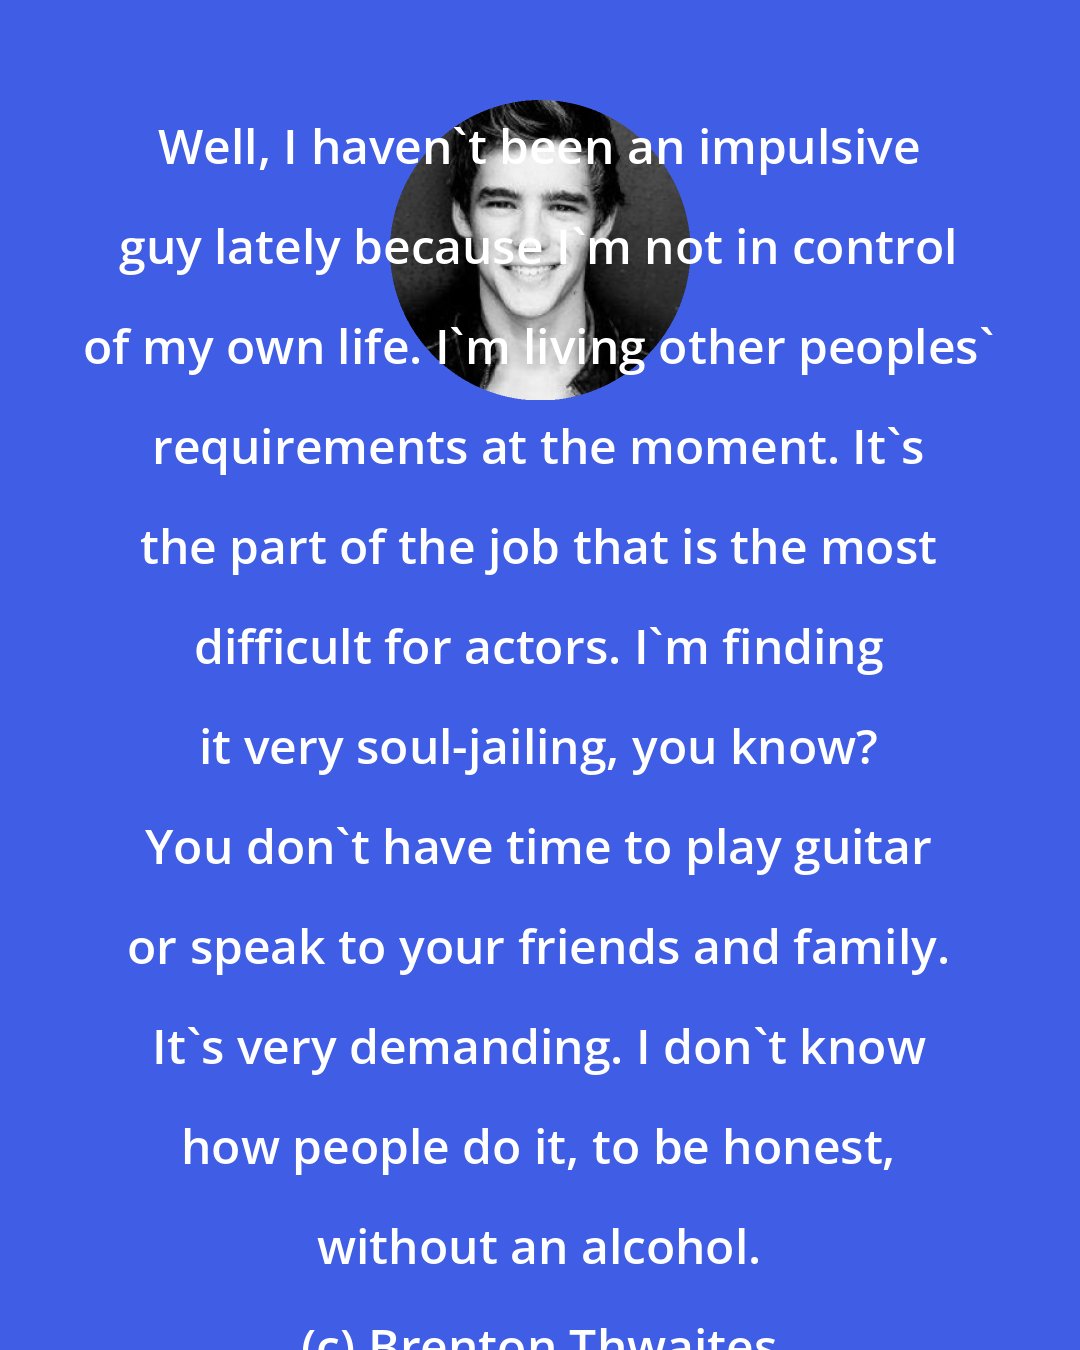 Brenton Thwaites: Well, I haven't been an impulsive guy lately because I'm not in control of my own life. I'm living other peoples' requirements at the moment. It's the part of the job that is the most difficult for actors. I'm finding it very soul-jailing, you know? You don't have time to play guitar or speak to your friends and family. It's very demanding. I don't know how people do it, to be honest, without an alcohol.